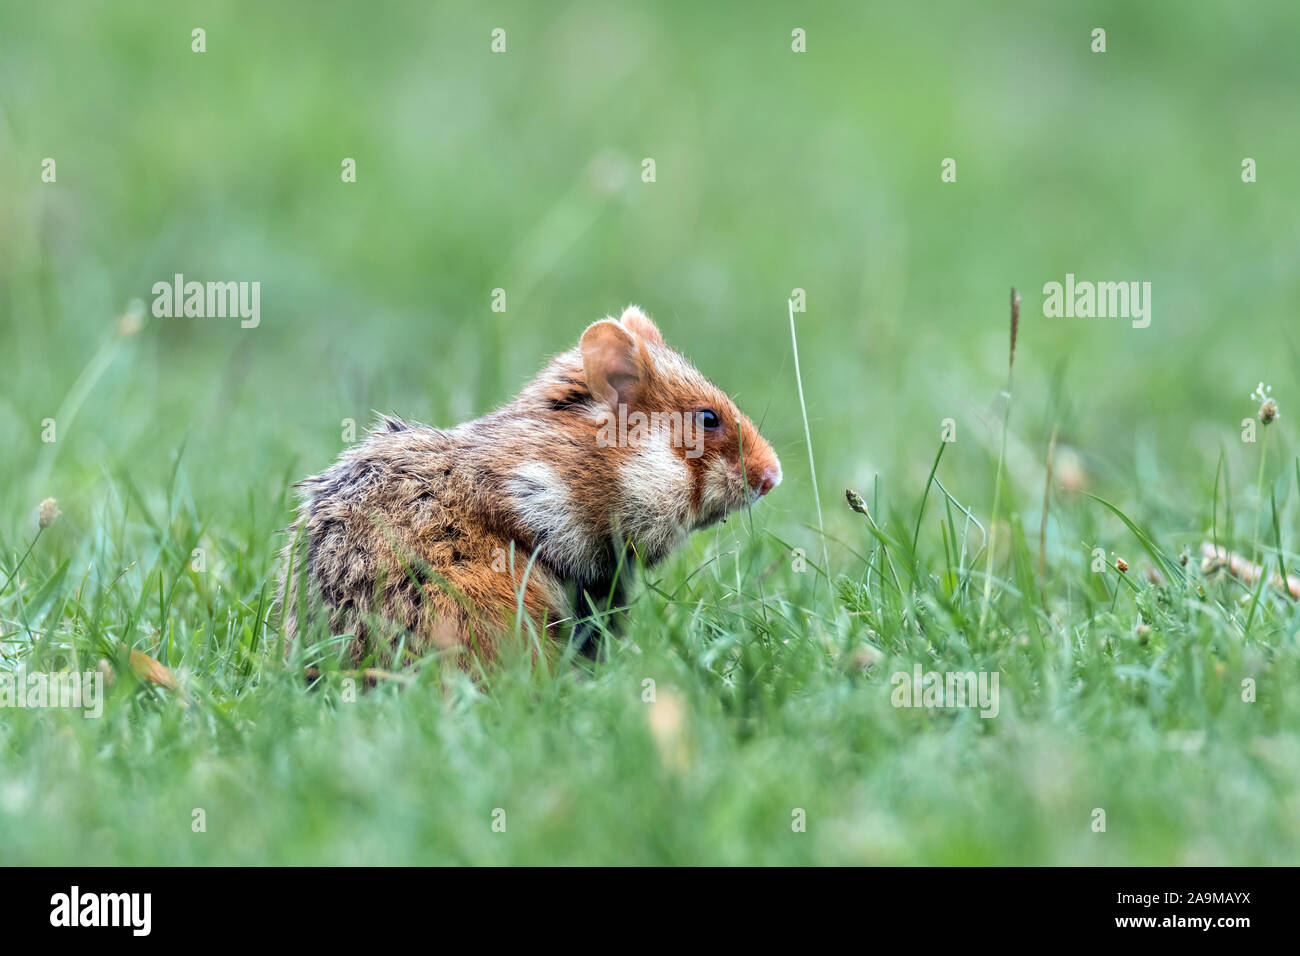 Feldhamster (Cricetus cricetus) Grand hamster Banque D'Images